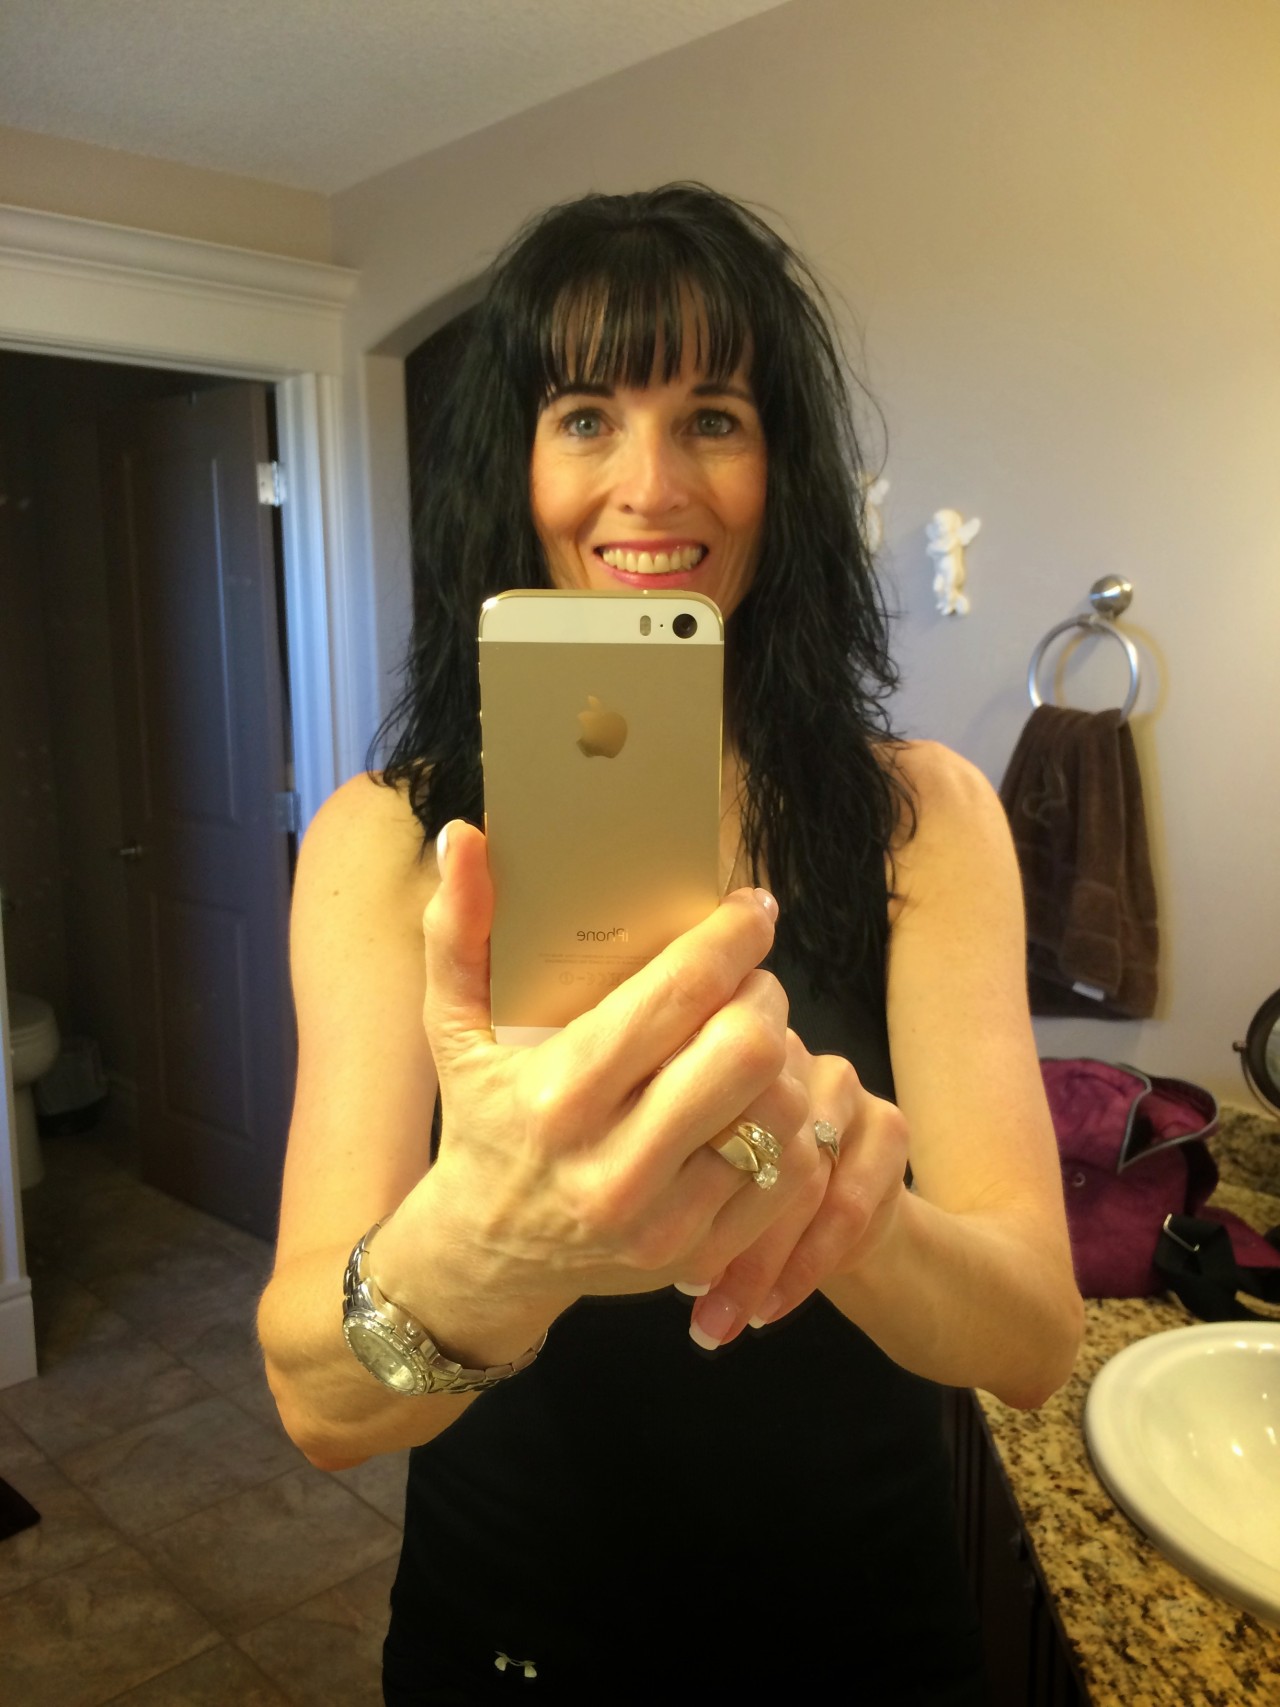 hotcalgarywife:  This is me. Married, Mom, HORNY, do you want me?